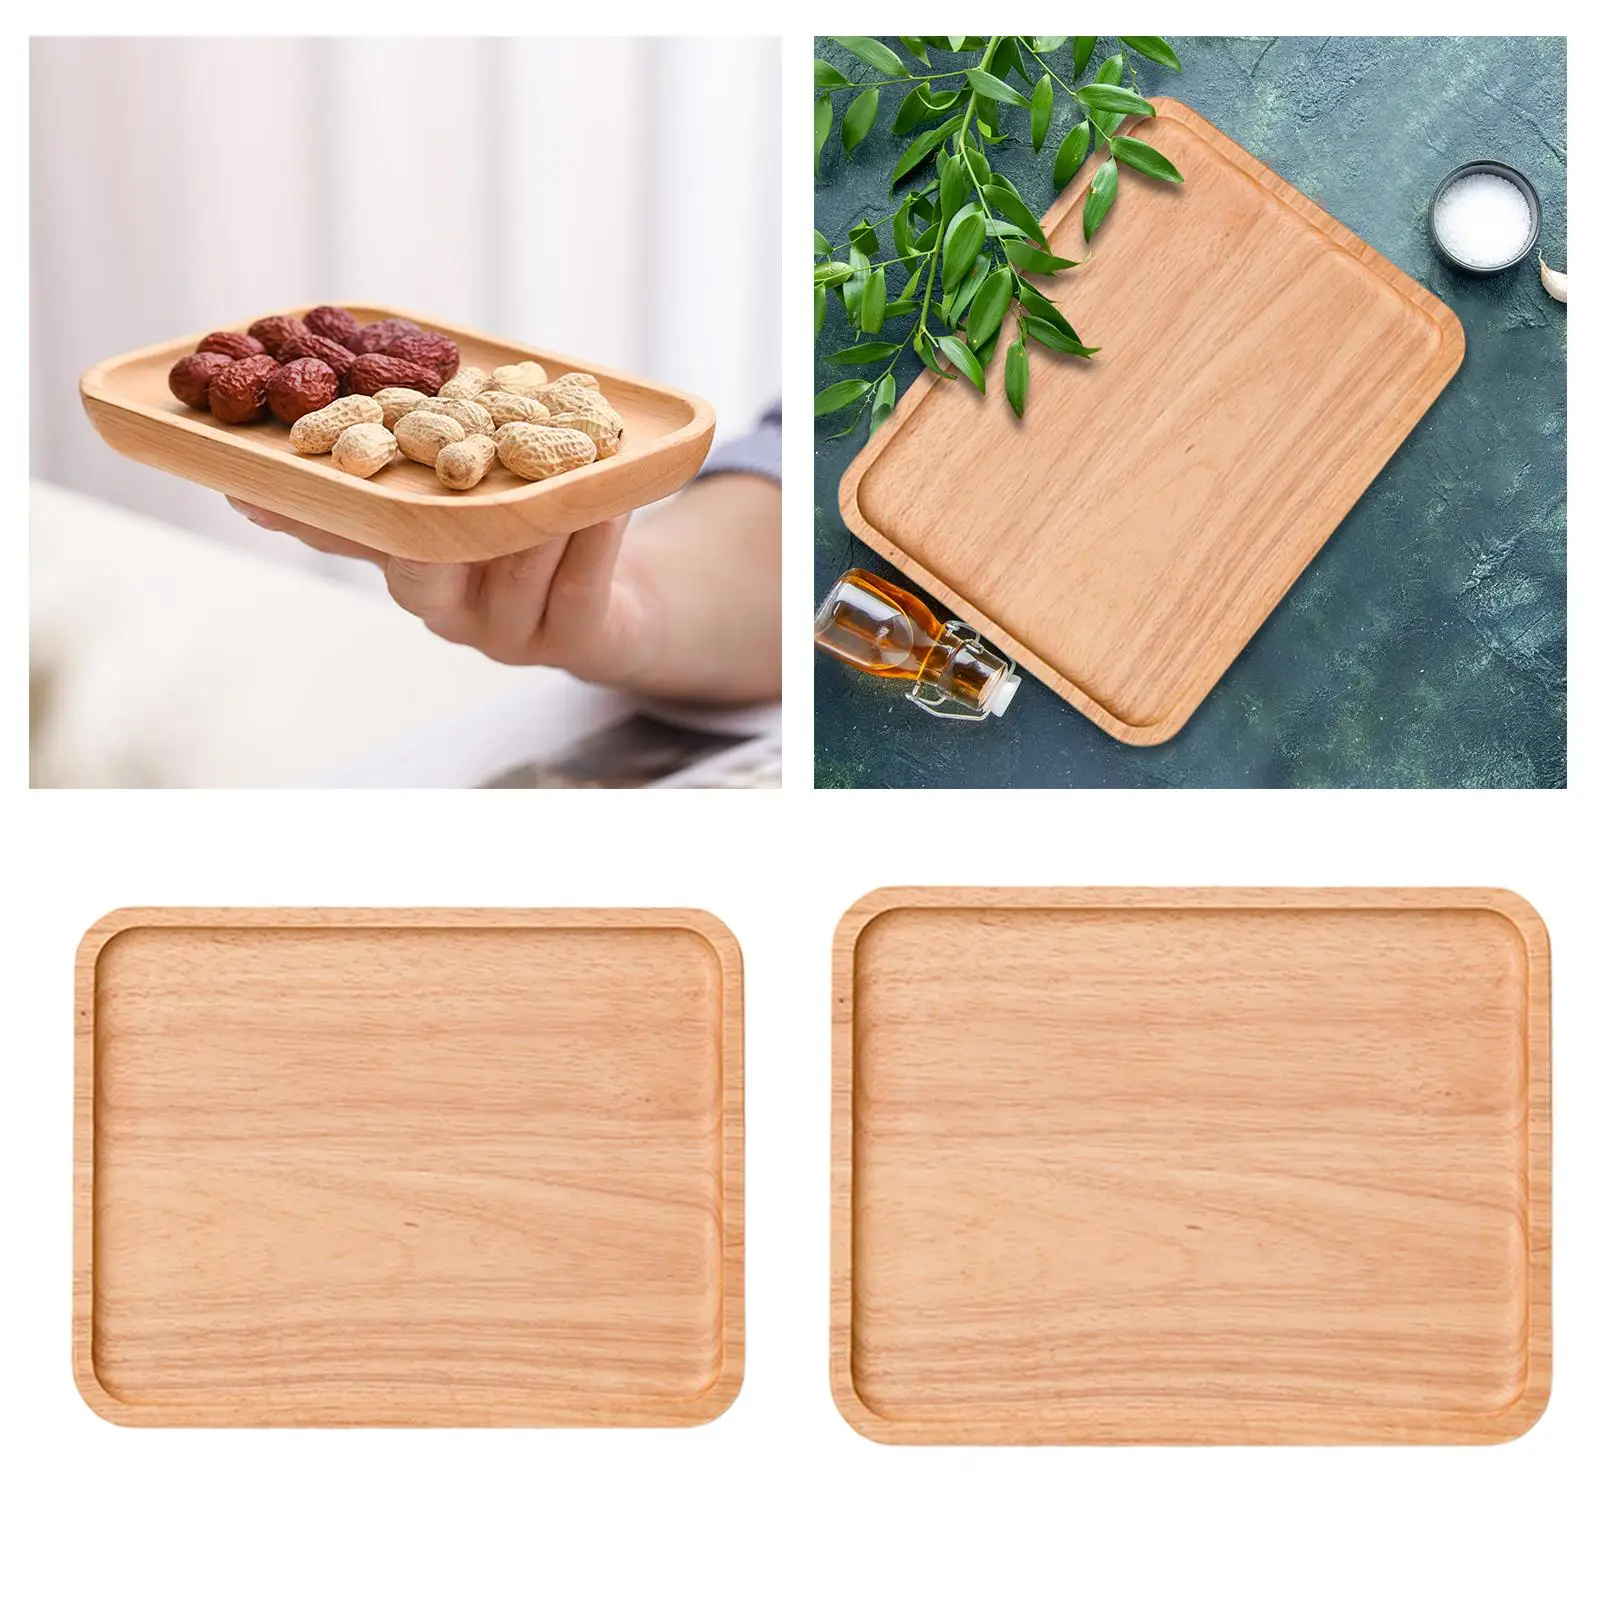 Wooden Serving Tray Cheese Board Tea Drink Platter Decorative Tray Dish for Ottoman Centerpiece Coffee Table Kitchen Decor